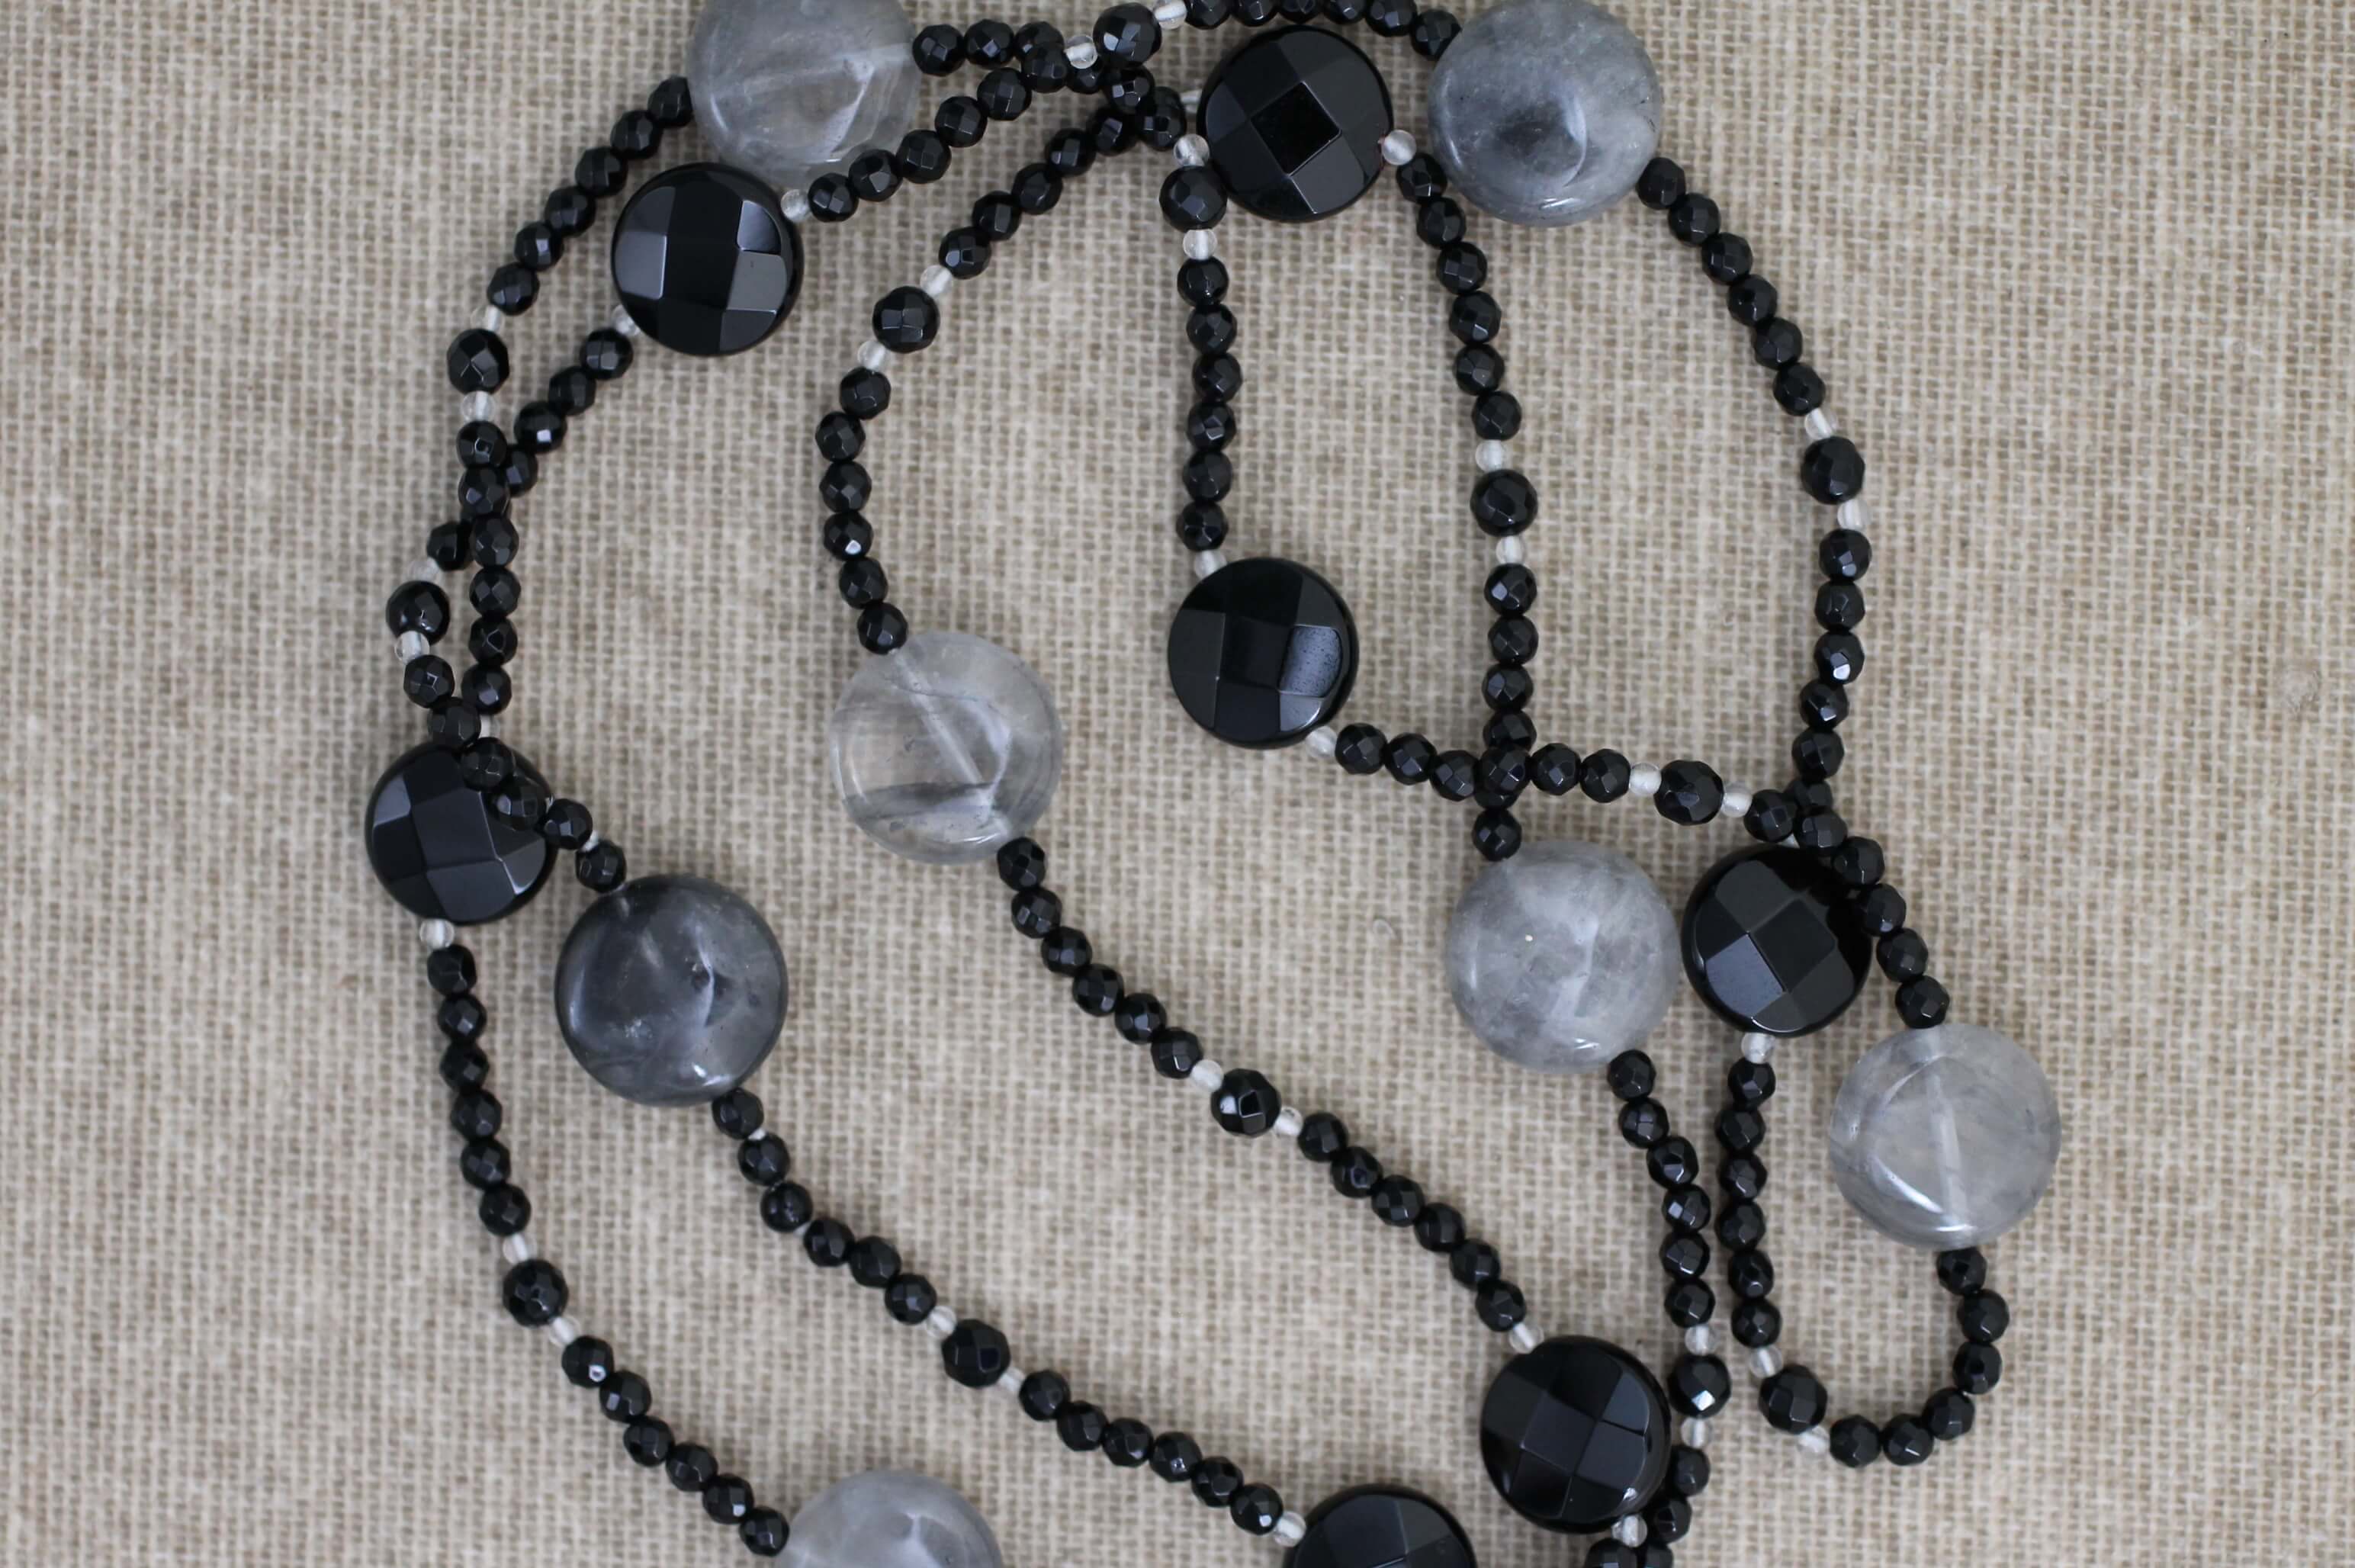 Faceted Onyx and Quartz necklace